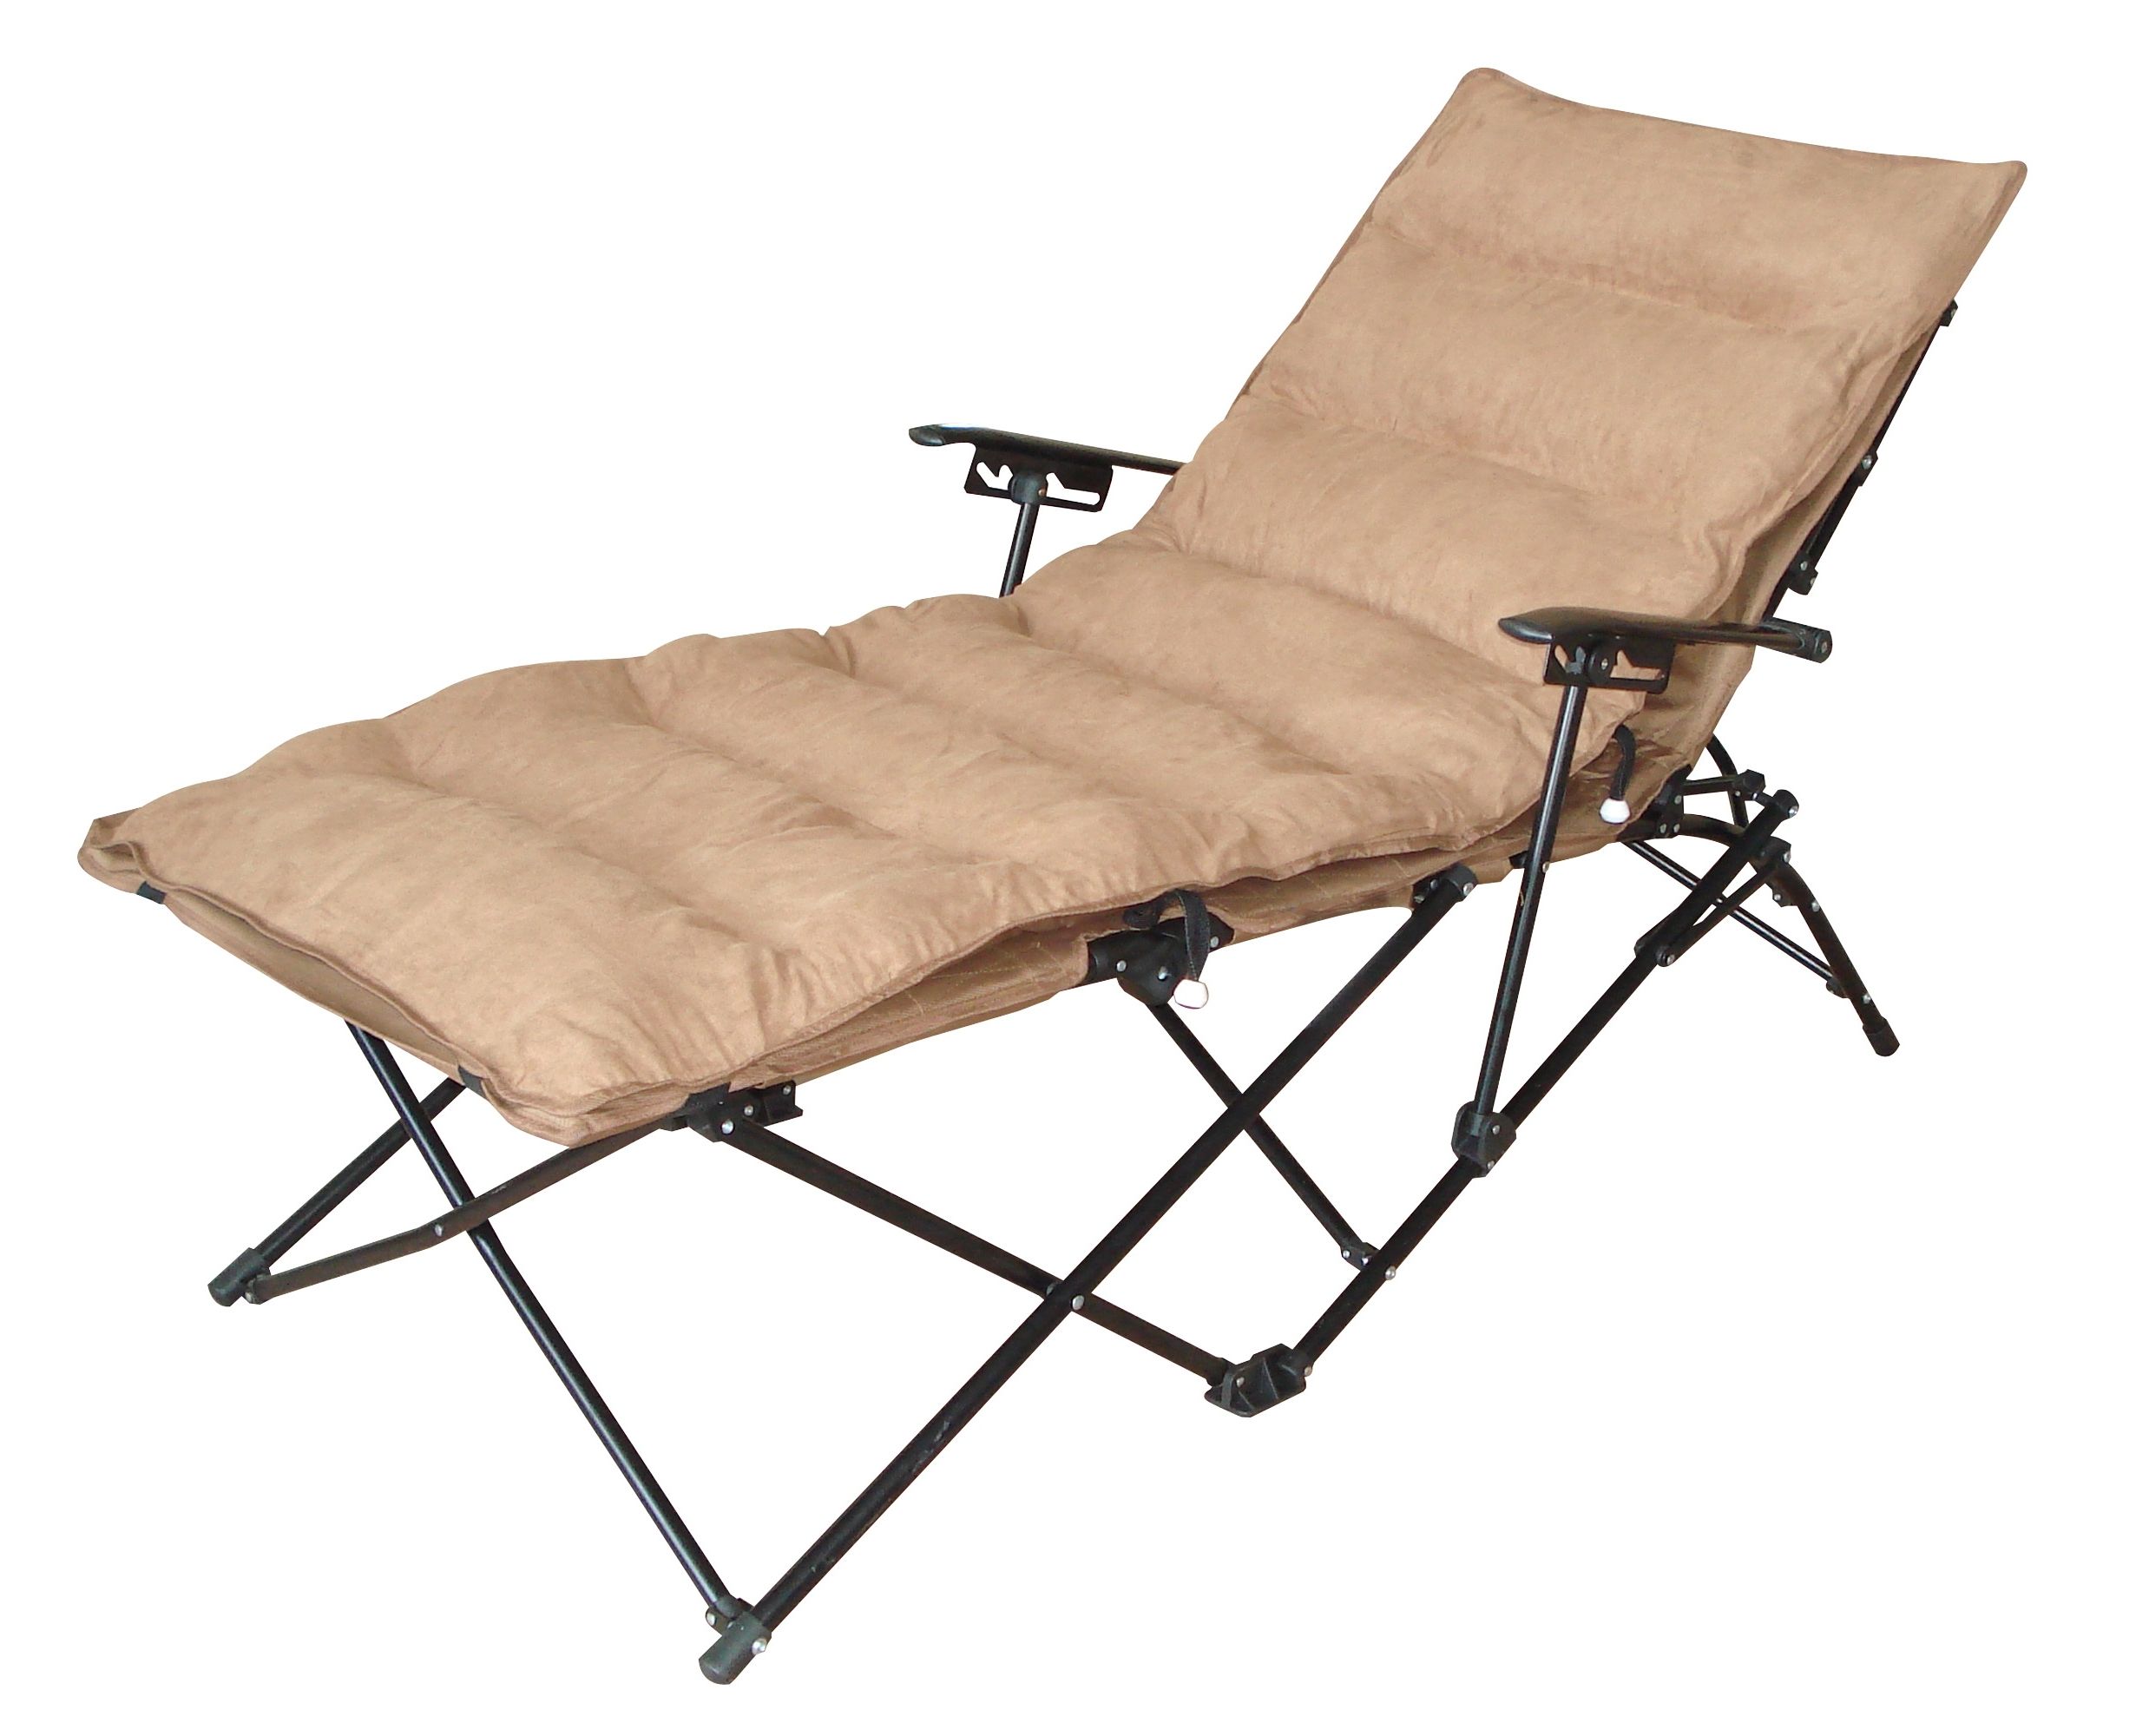 Outdoor : Folding Beach Chairs Beach Chaise Lounge Jelly Folding In Fashionable Jelly Chaise Lounge Chairs (View 6 of 15)